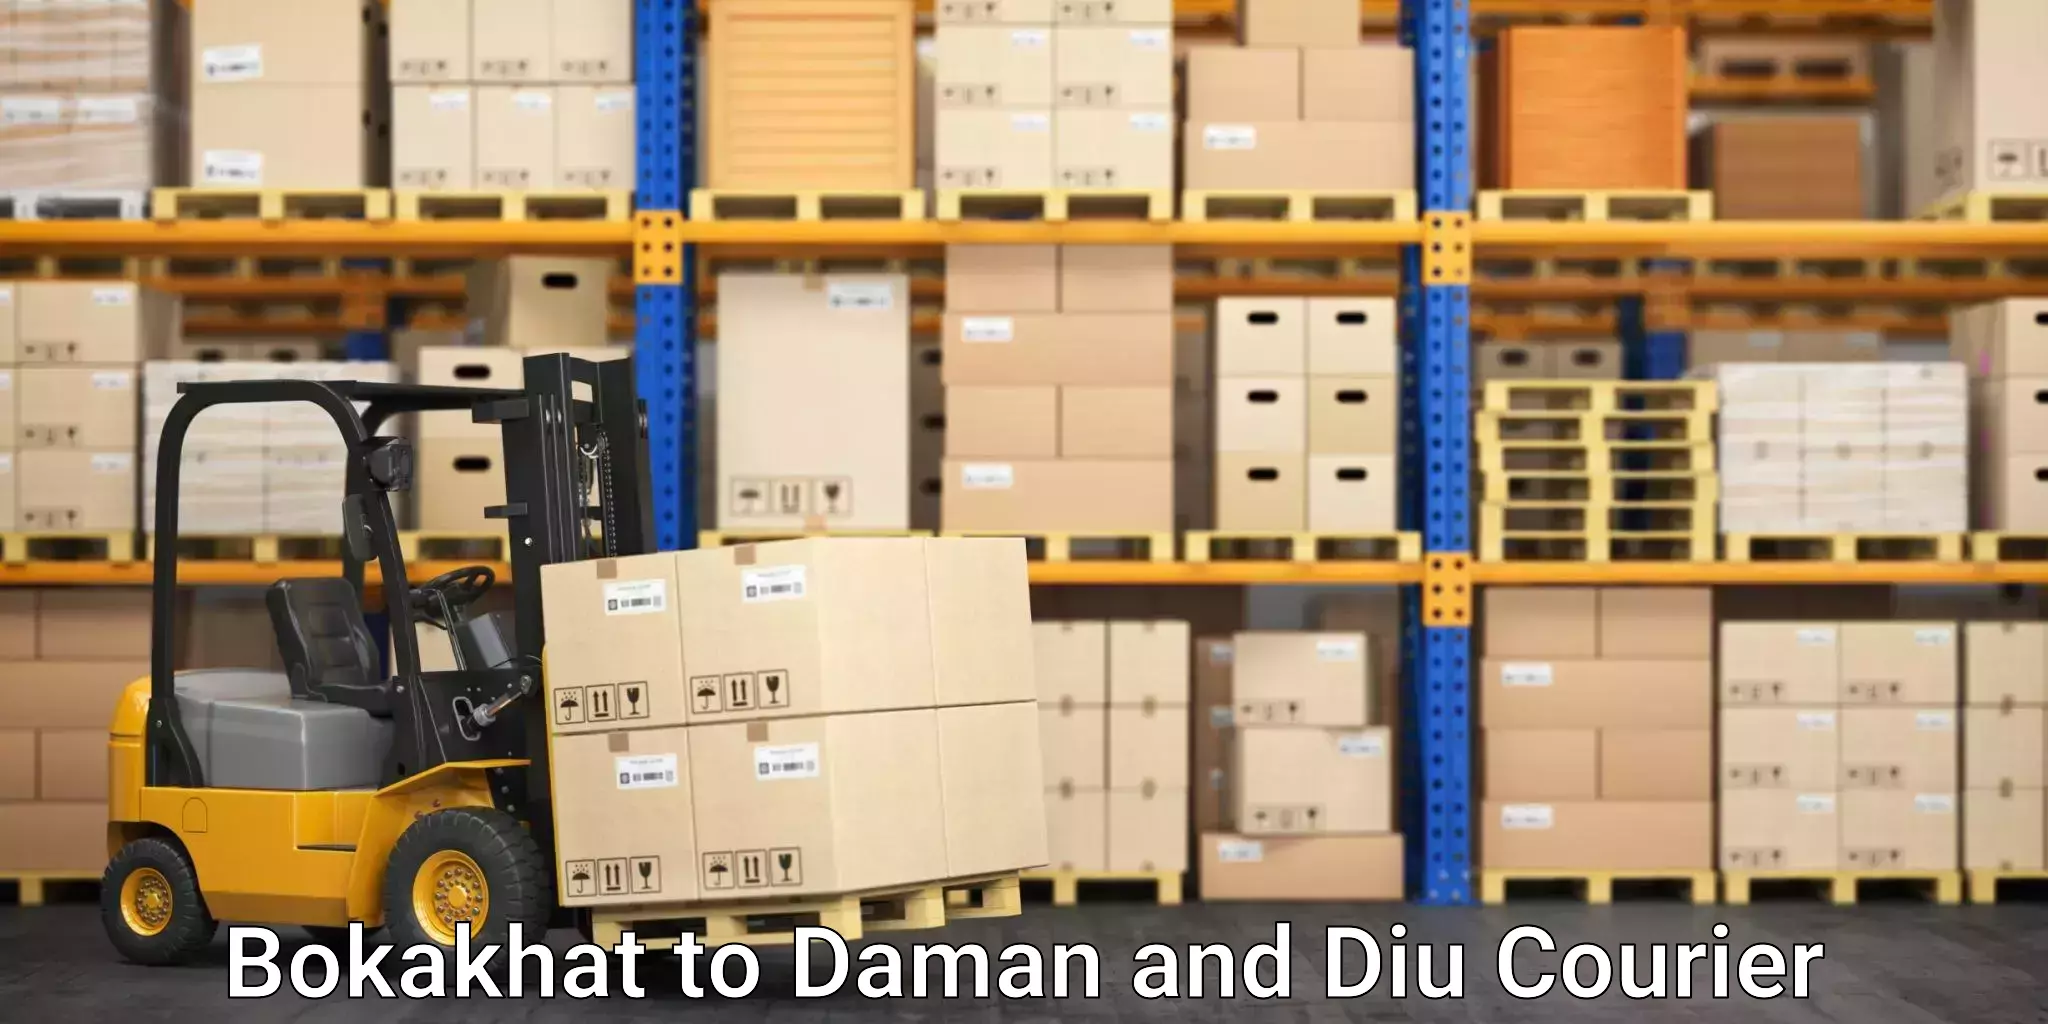 Express delivery capabilities Bokakhat to Daman and Diu